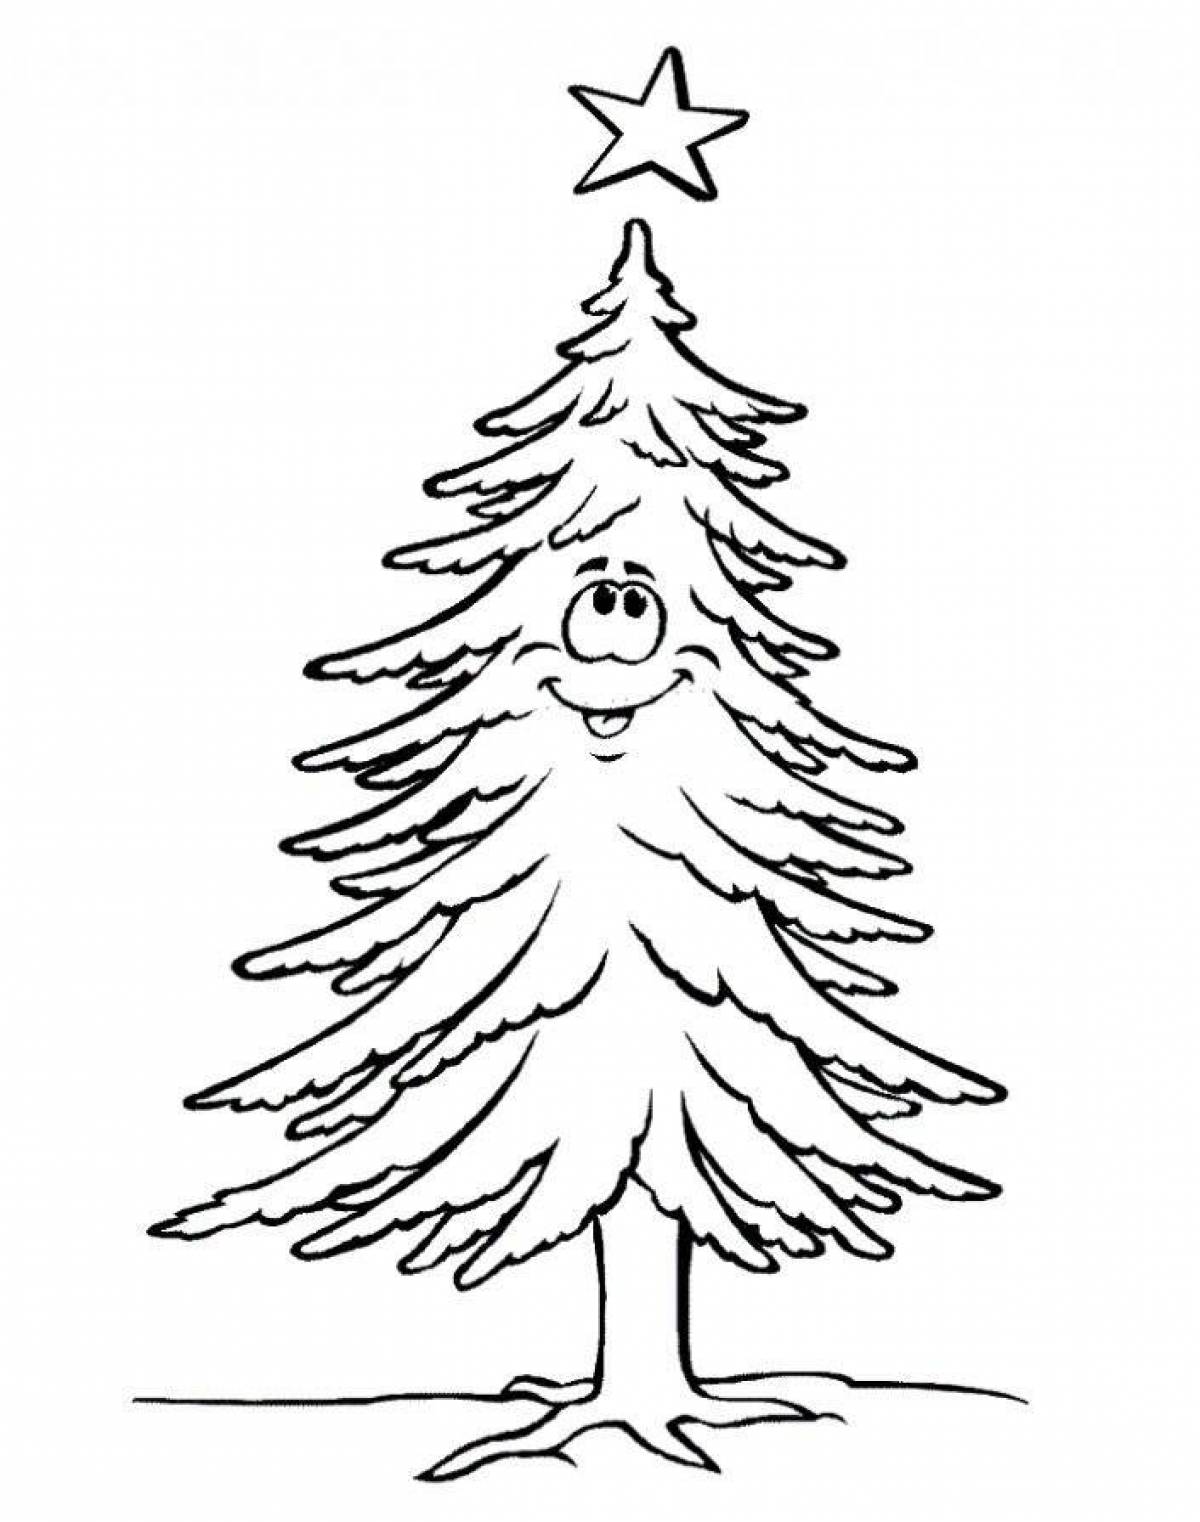 Coloring page gorgeous spruce